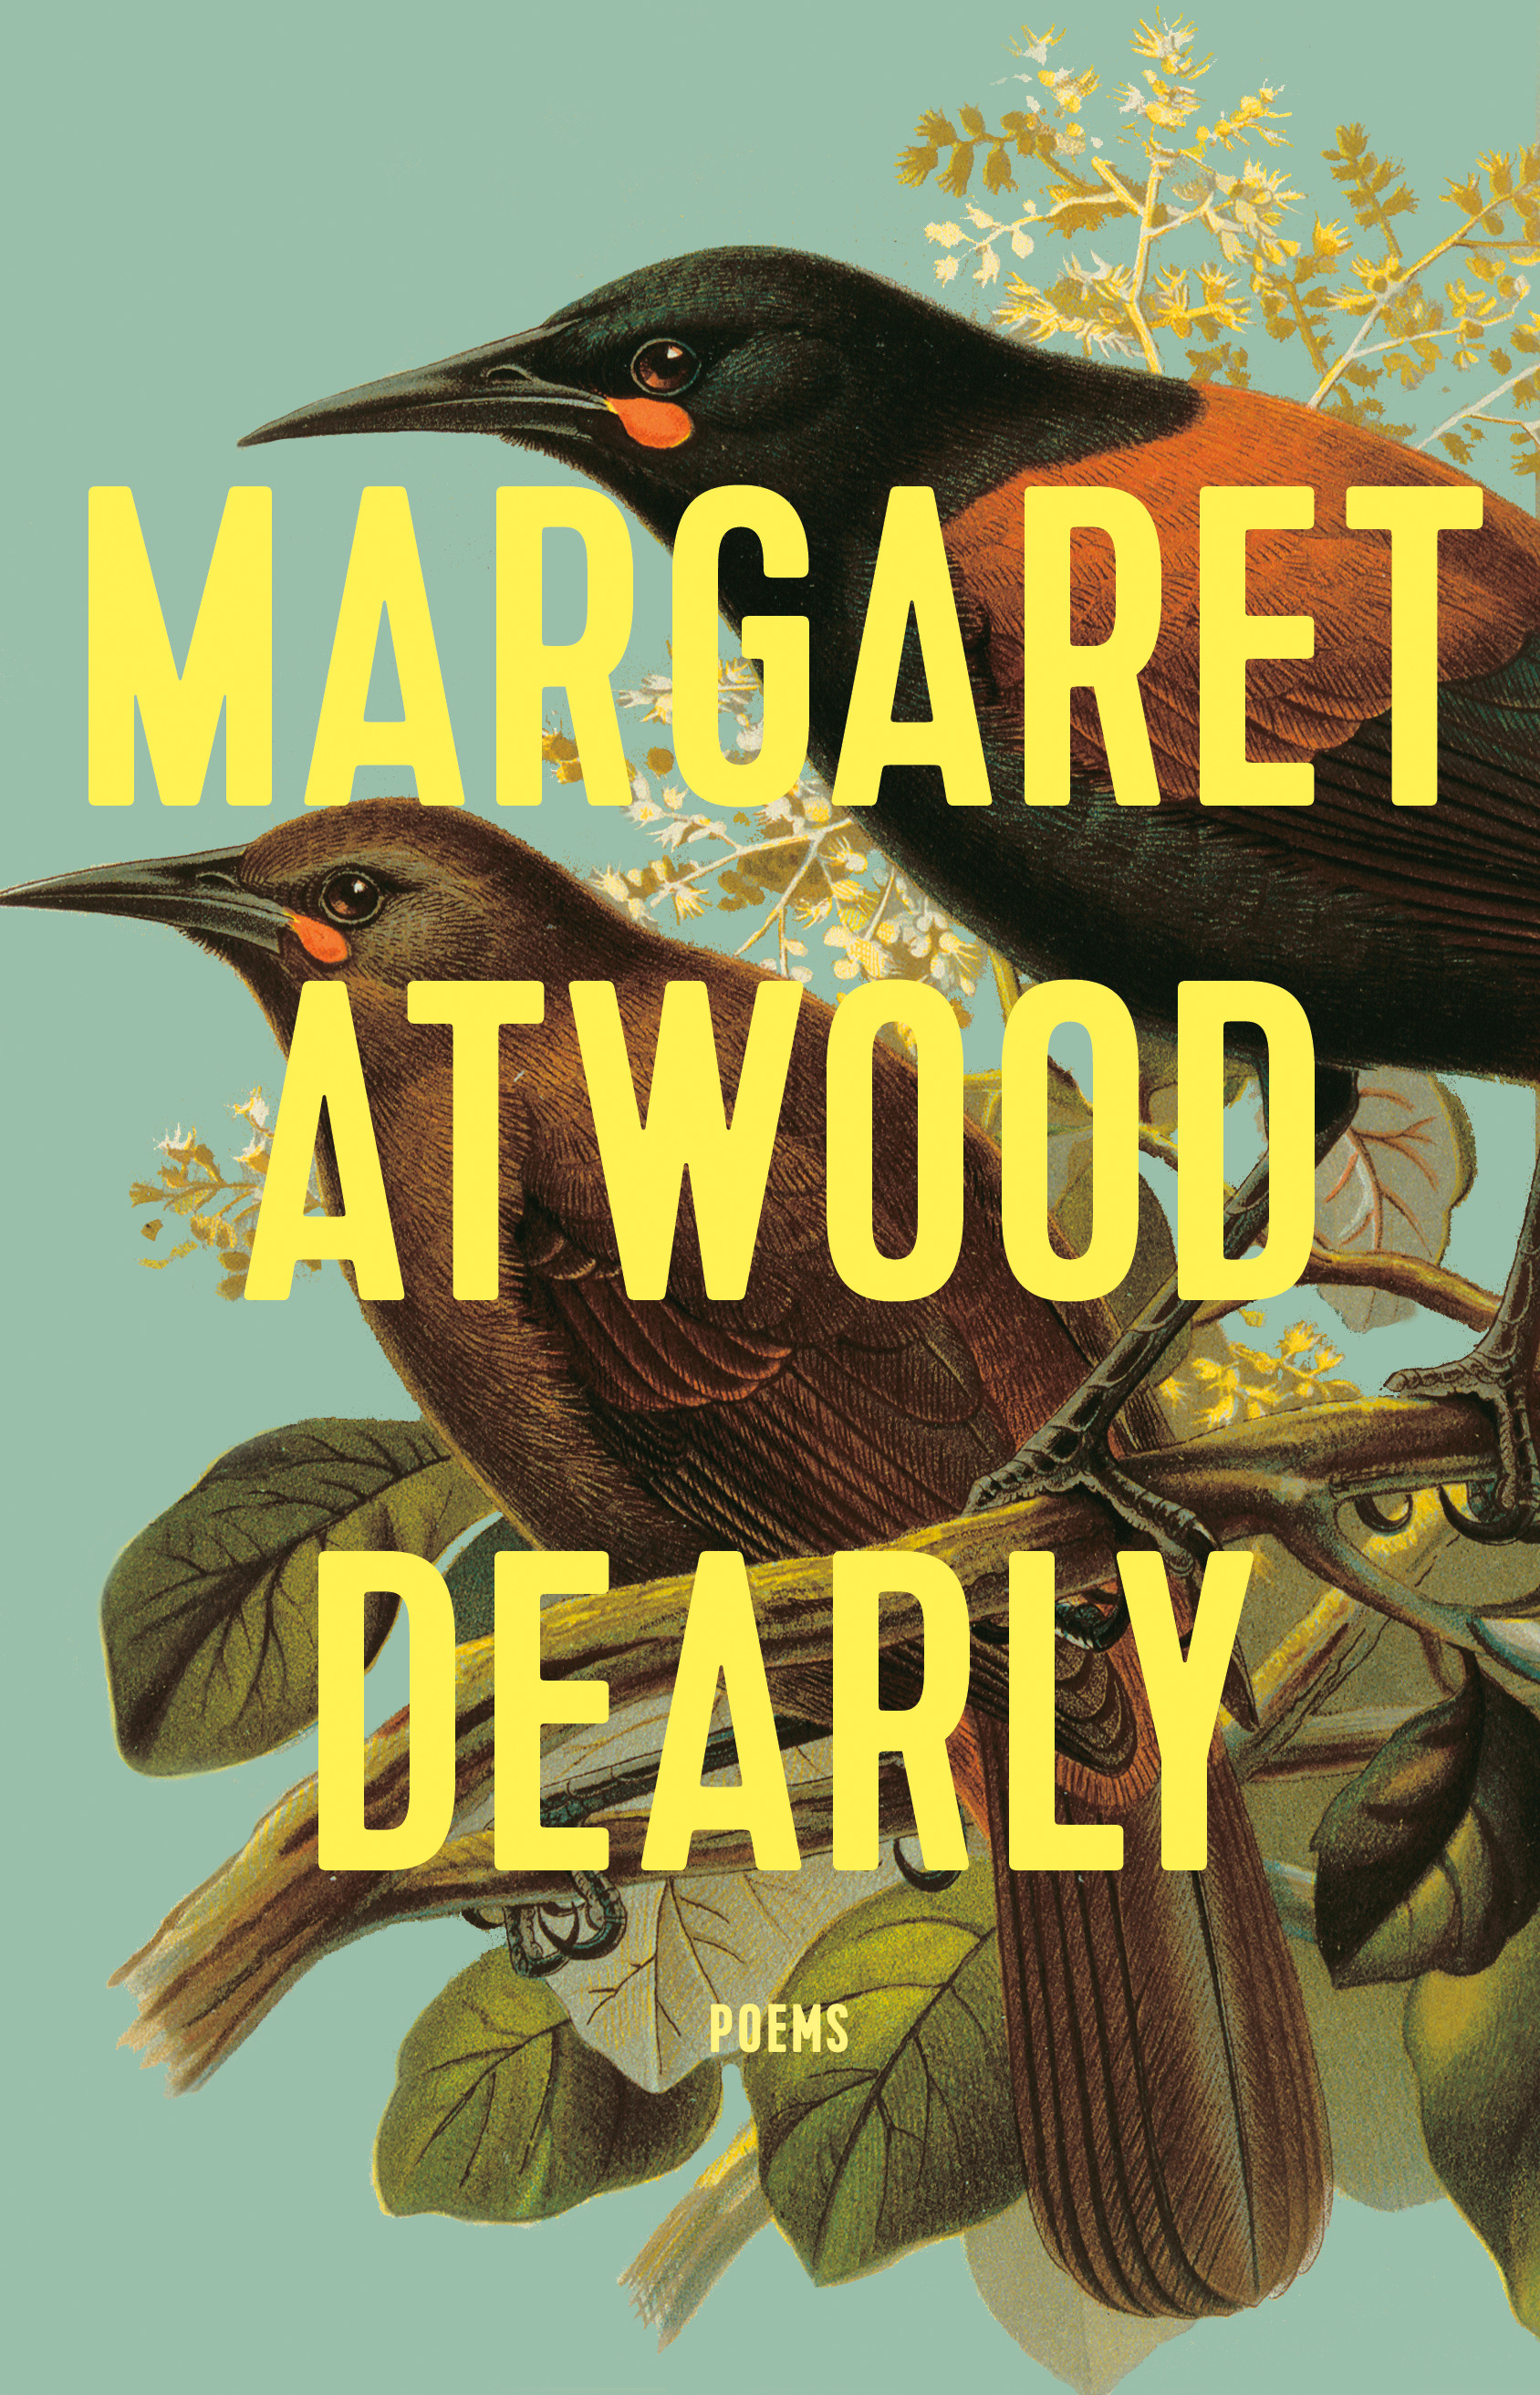 Dearly : Poems | Atwood, Margaret